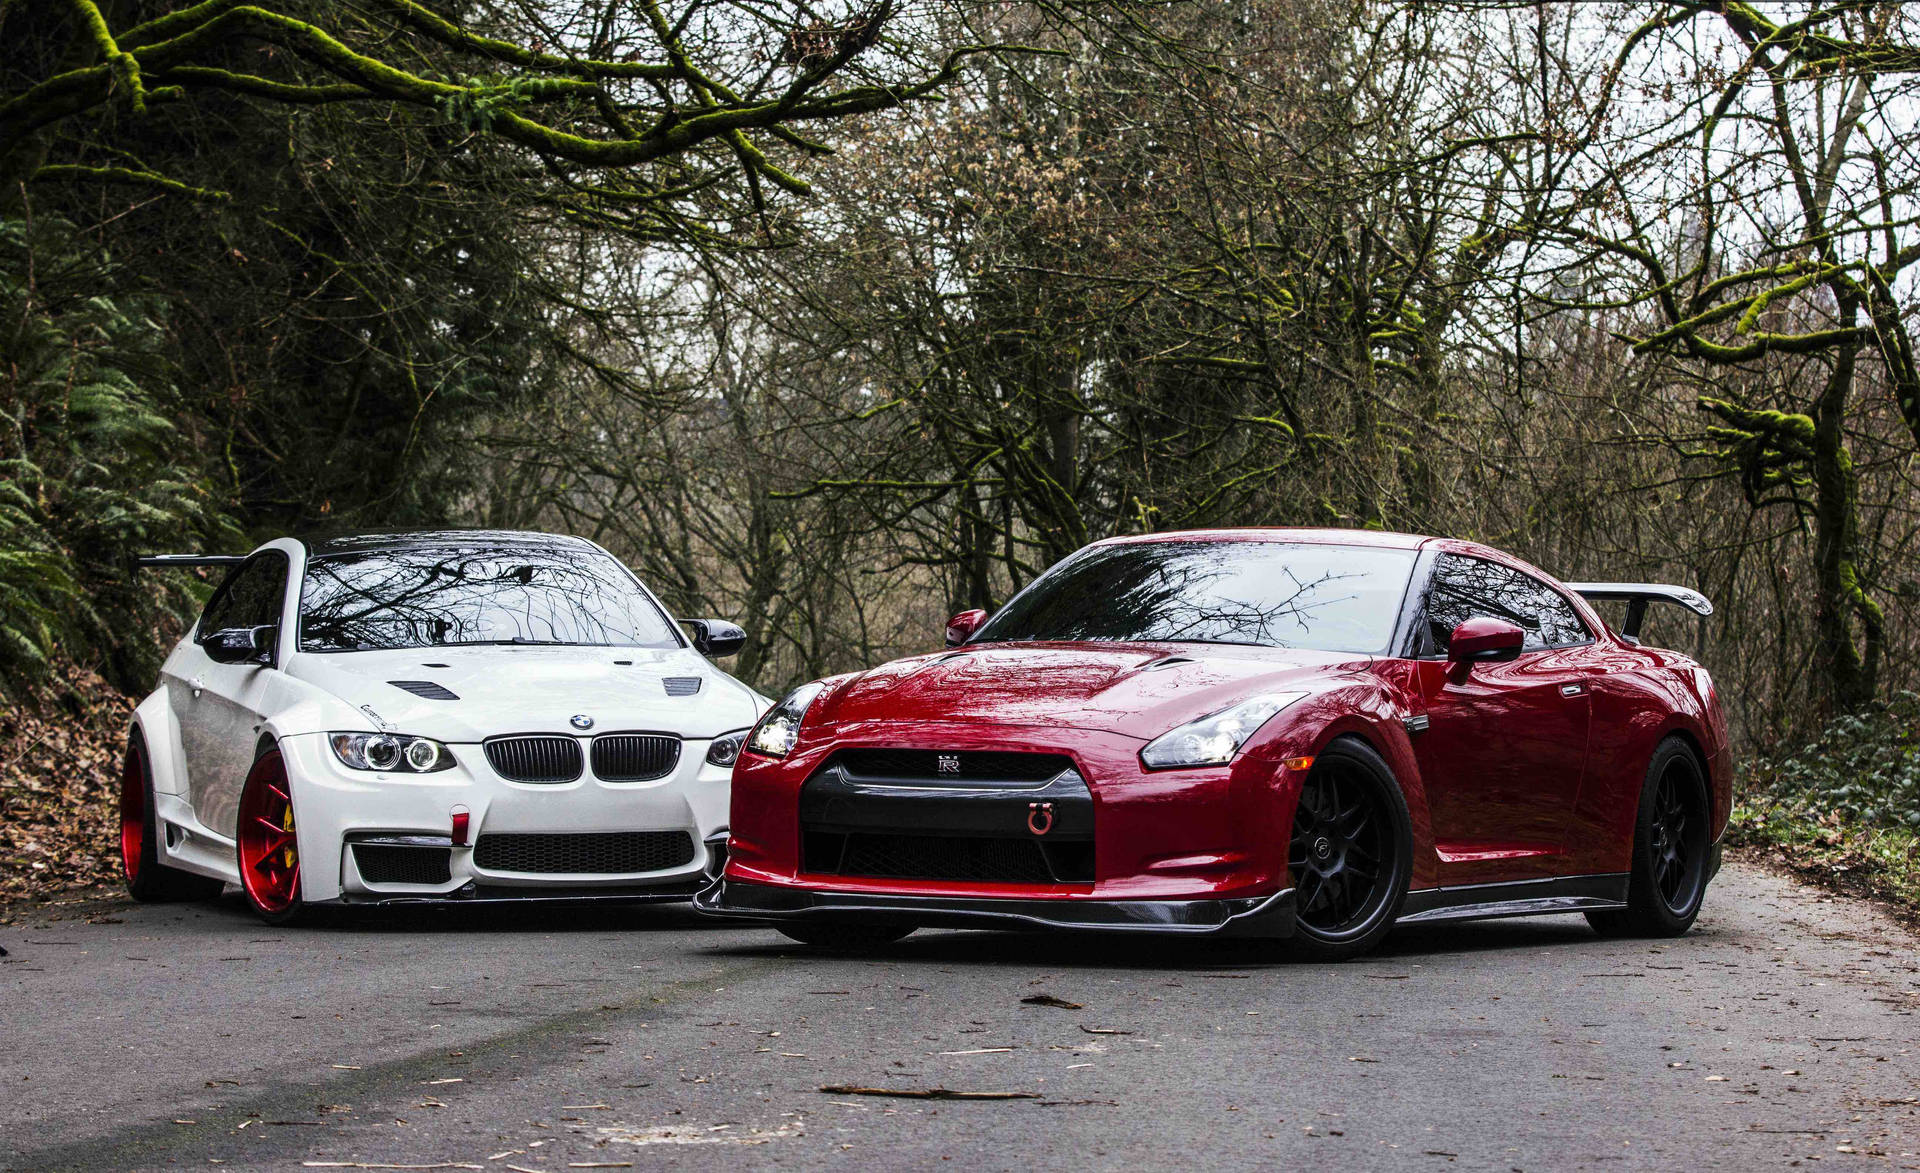 A captivating showdown between the Nissan Skyline GTR R35 and a stunning white BMW. Wallpaper